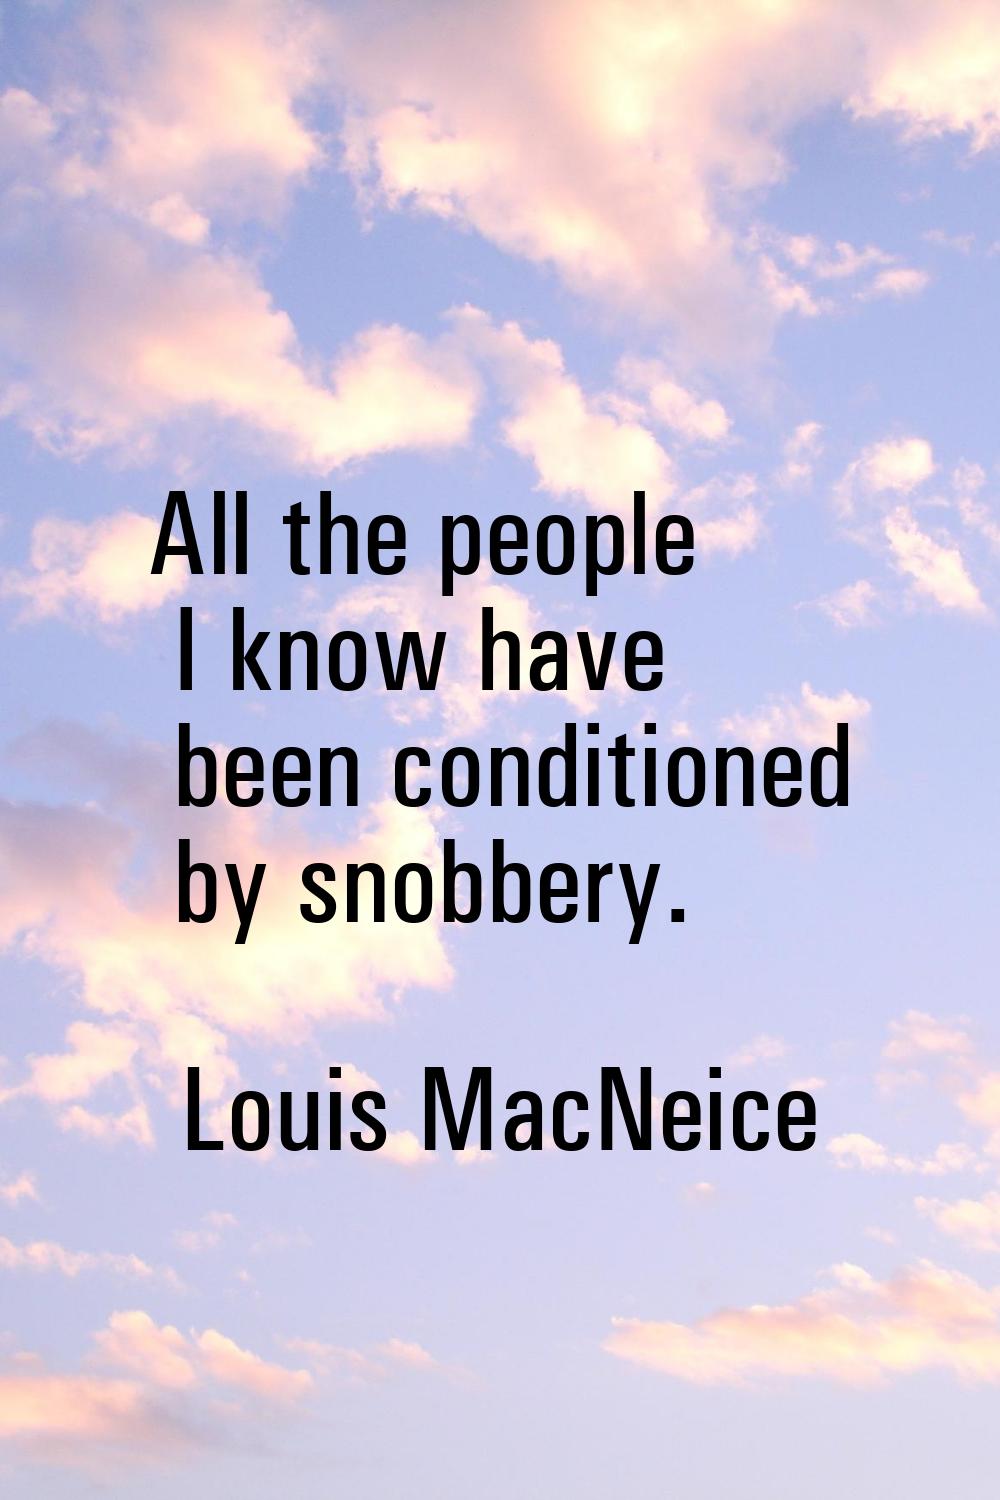 All the people I know have been conditioned by snobbery.